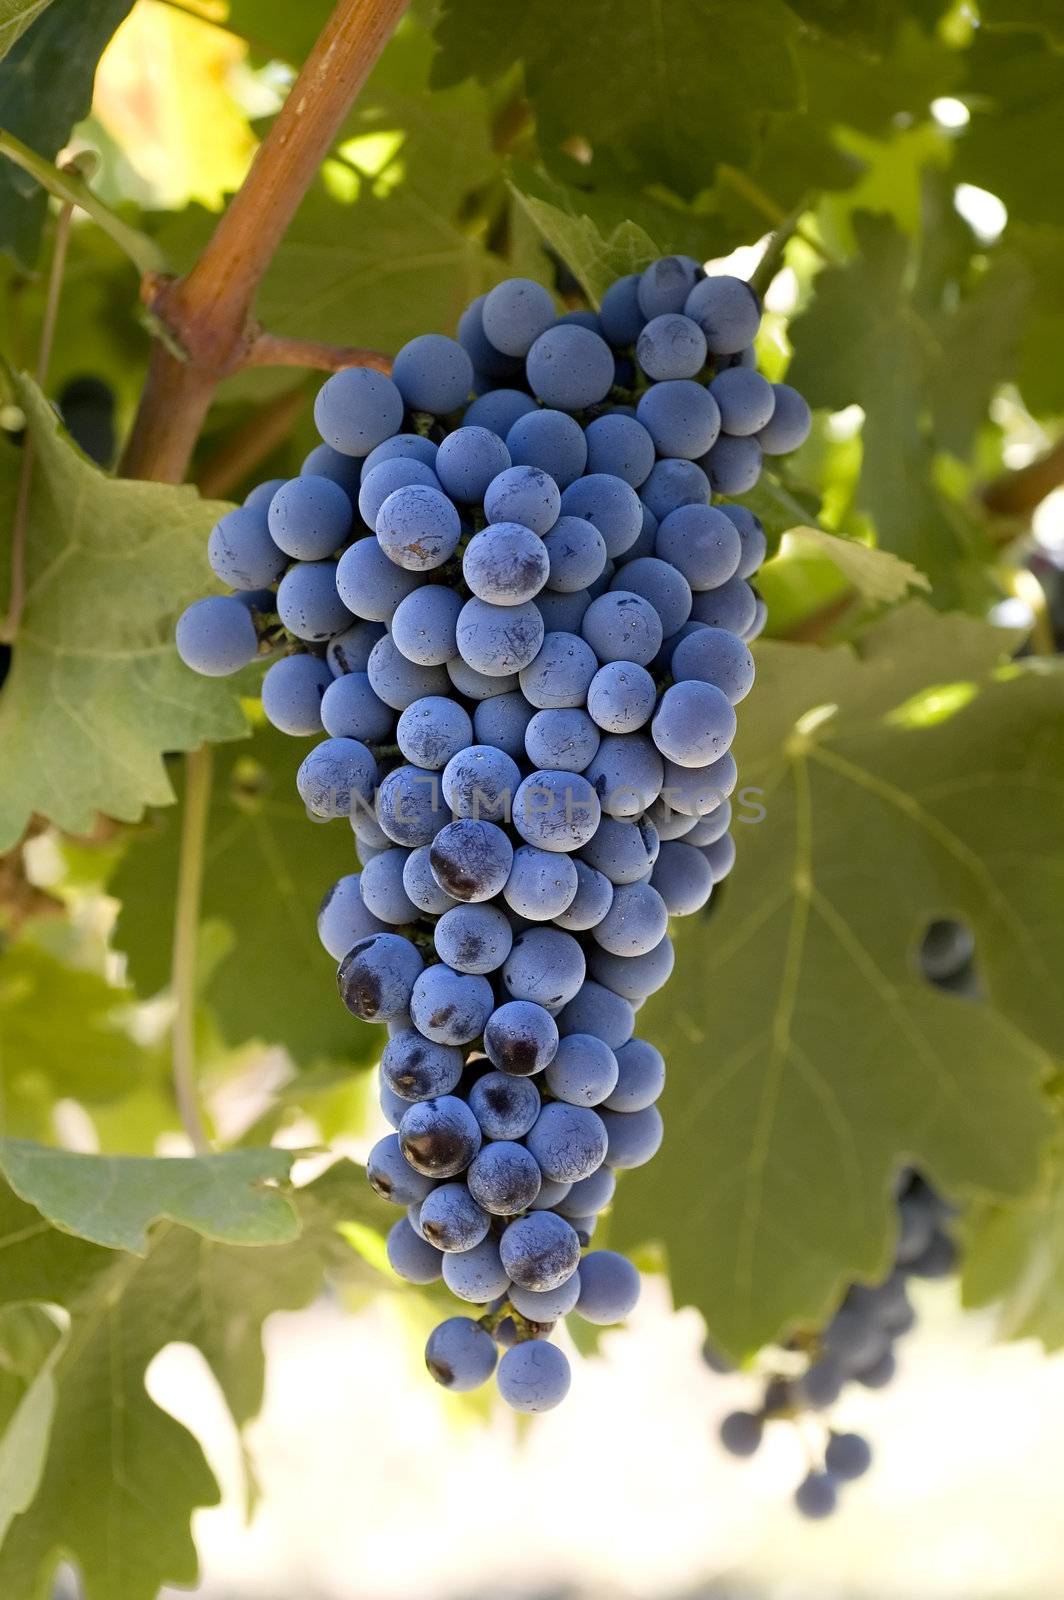 A beautiful view of a bunch of fresh, juicy ripe Cabernet Sauvignon grapes still on the vine, ready to be picked.